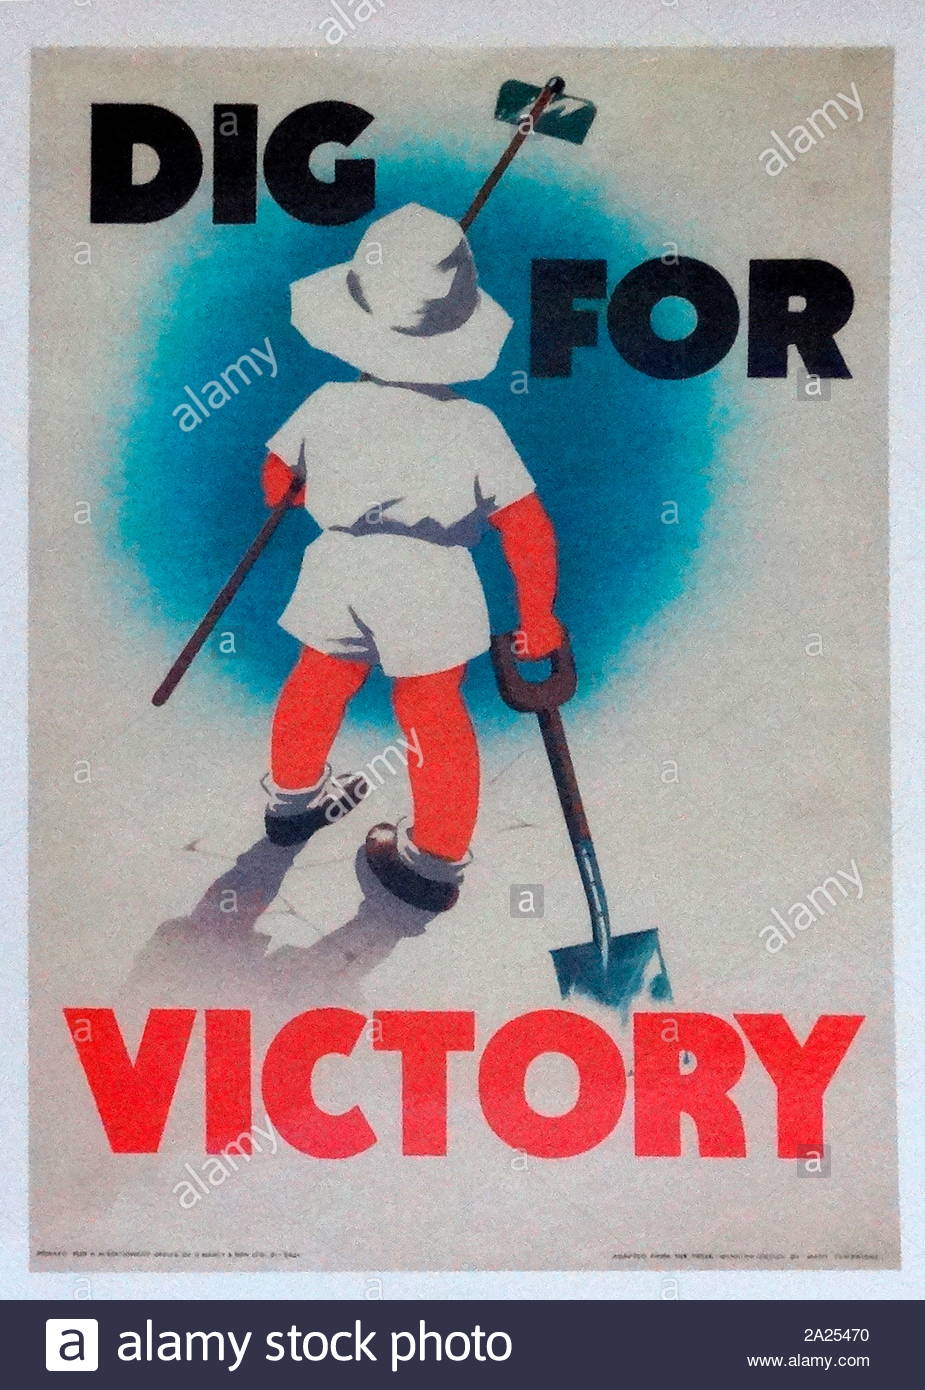 Dig for Britain, Victory' British propaganda poster, to influence the population towards support for the war effort in World war two. Stock Photo